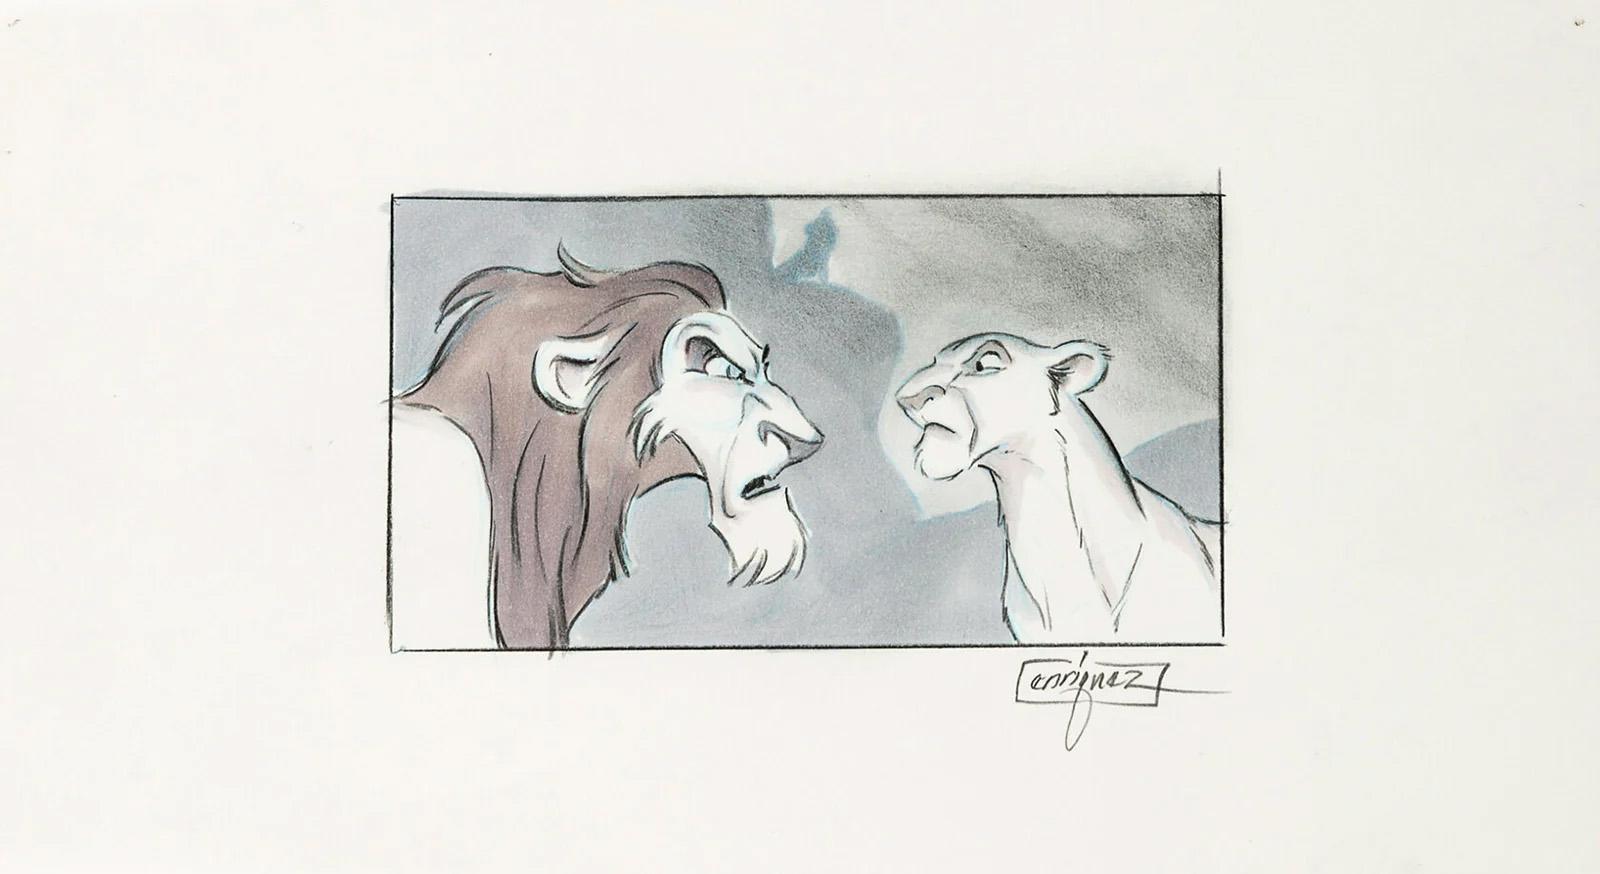 Lion King Storyboard Sequence (GROUP OF 9): Scar, Simba and Sarabi - Art by Thom Enriquez